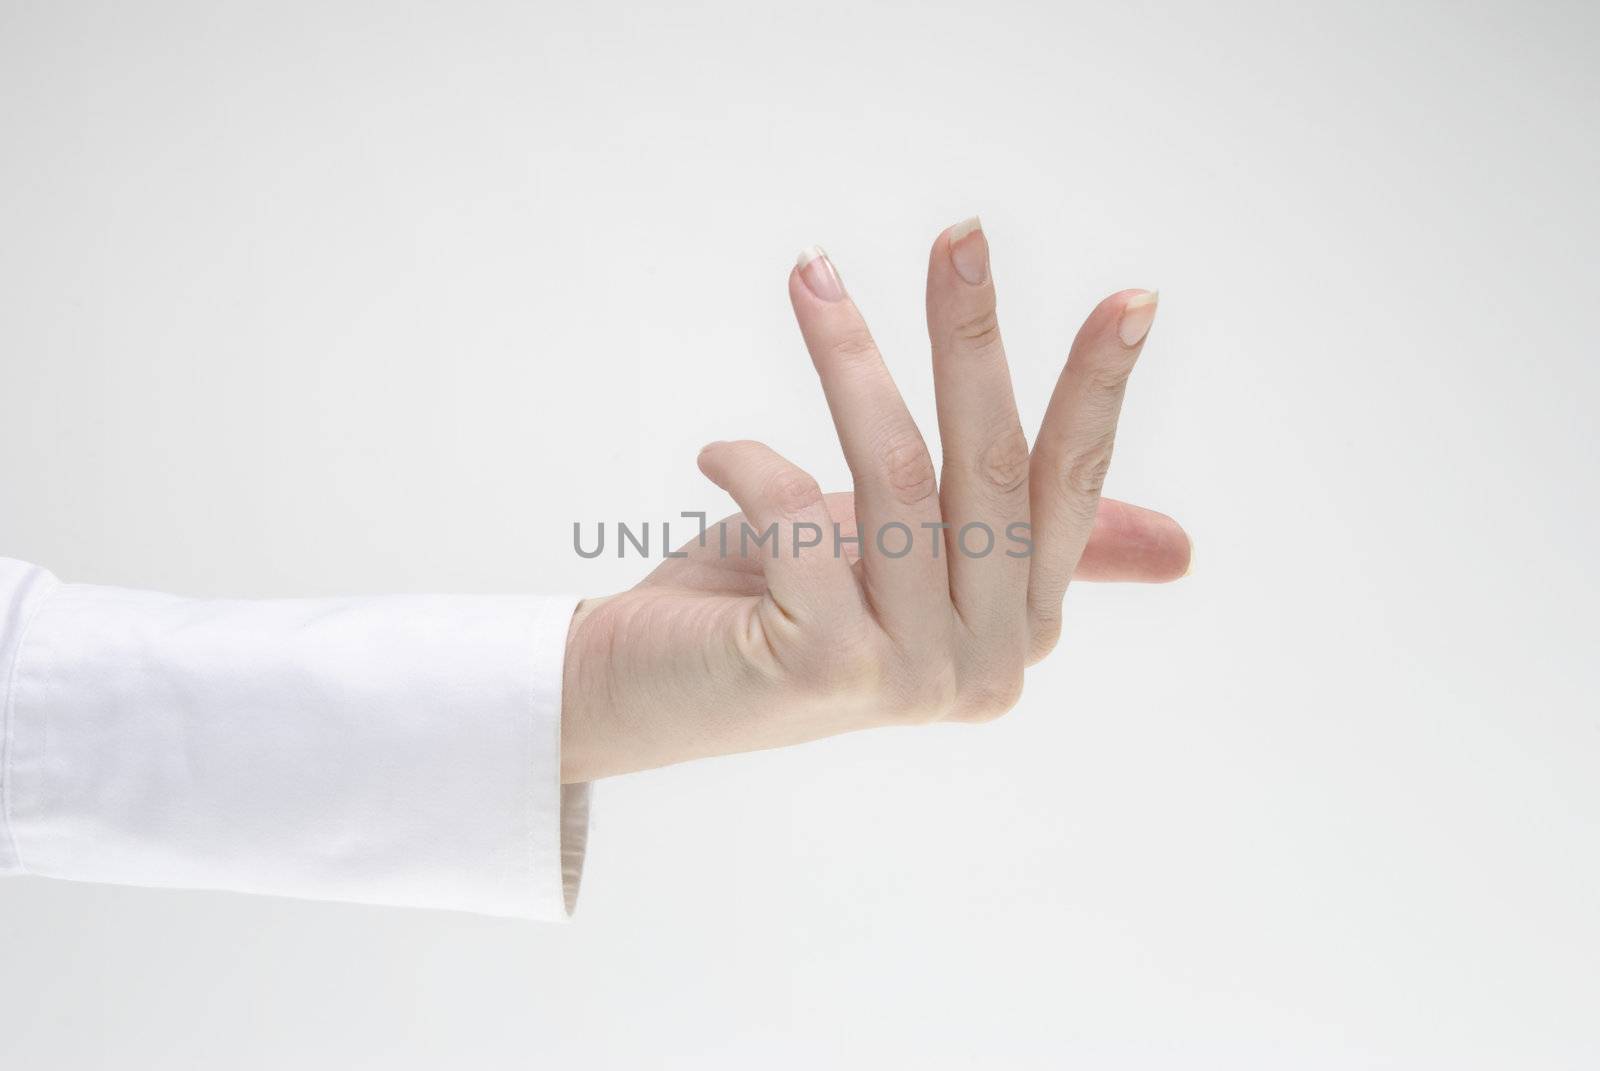 Woman's hand making gesture light background